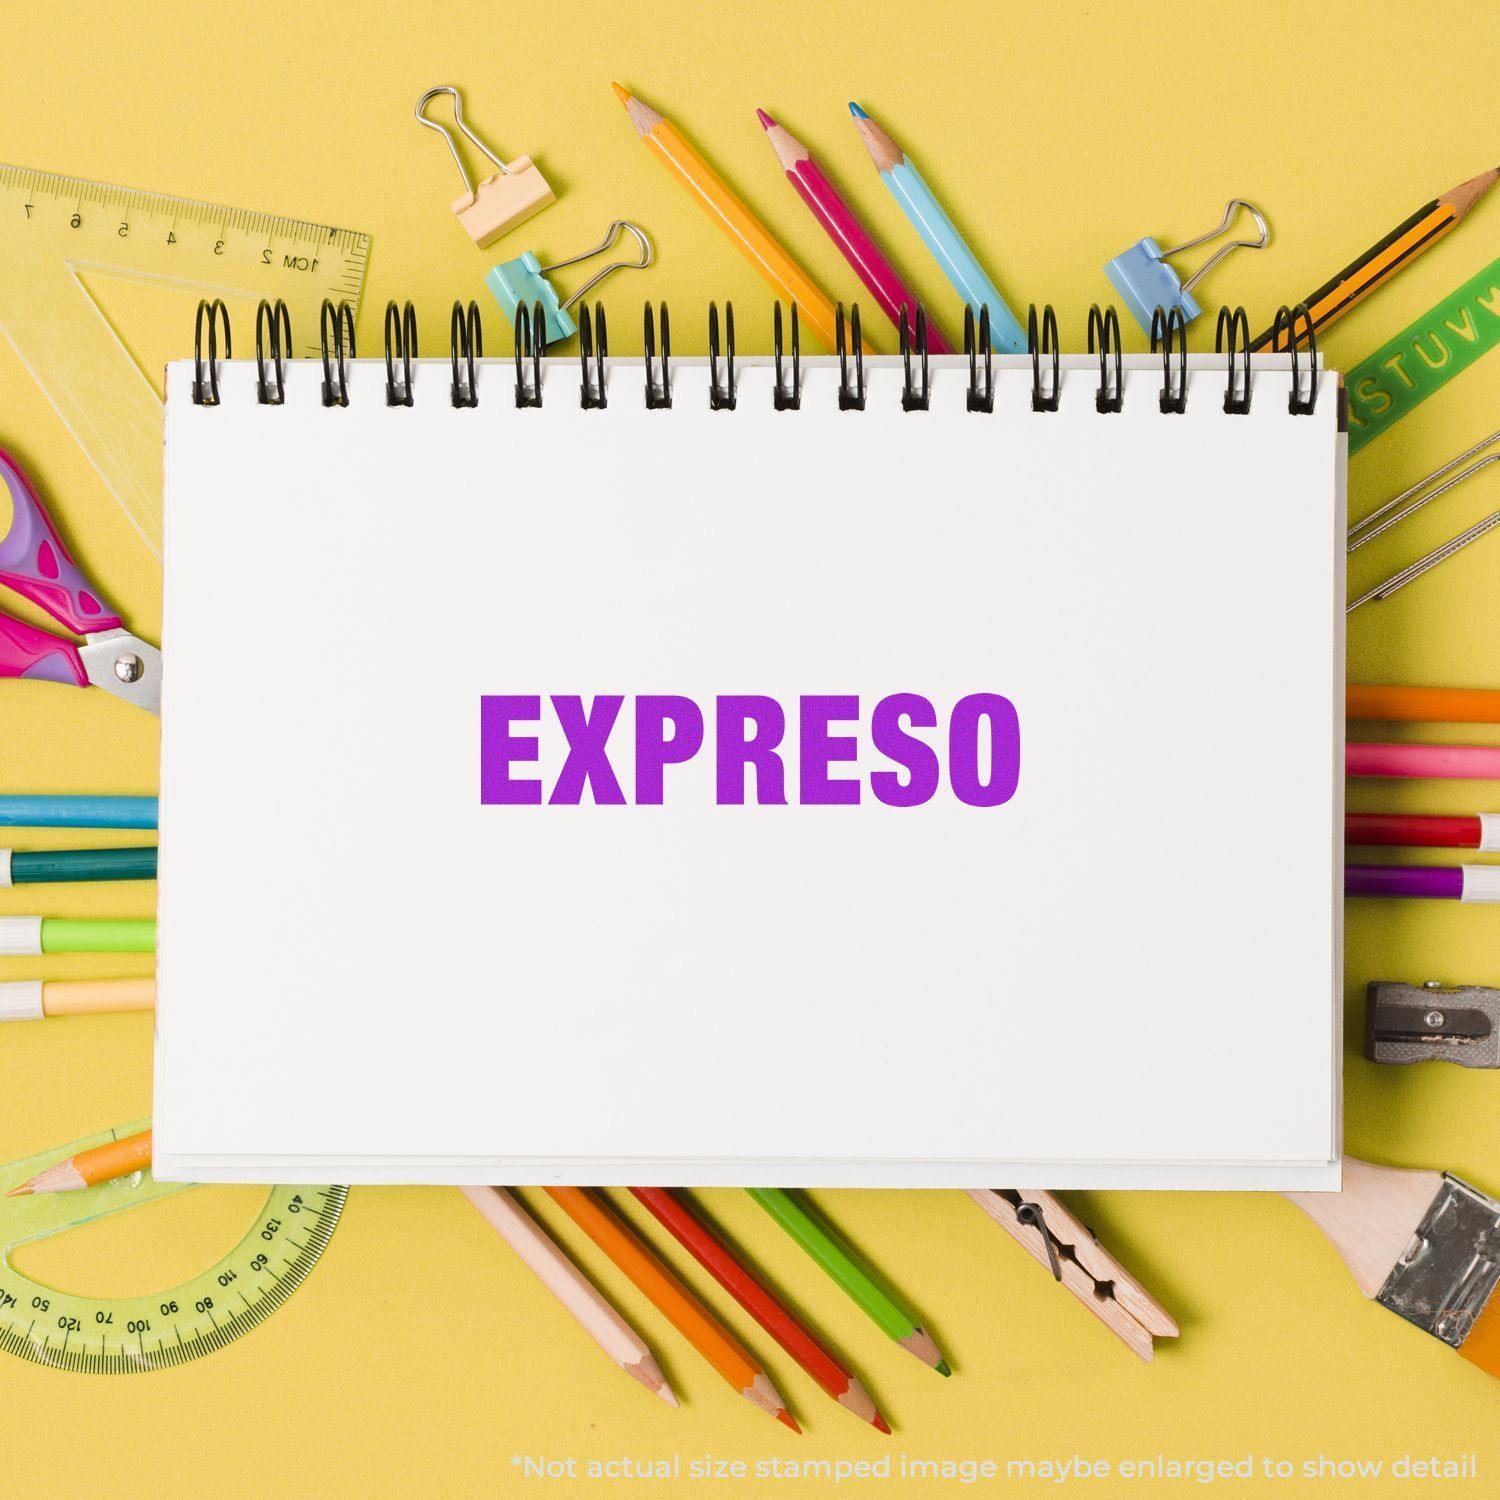 A self-inking stamp with a stamped image showing how the text "EXPRESO" in a large font is displayed by it after stamping.